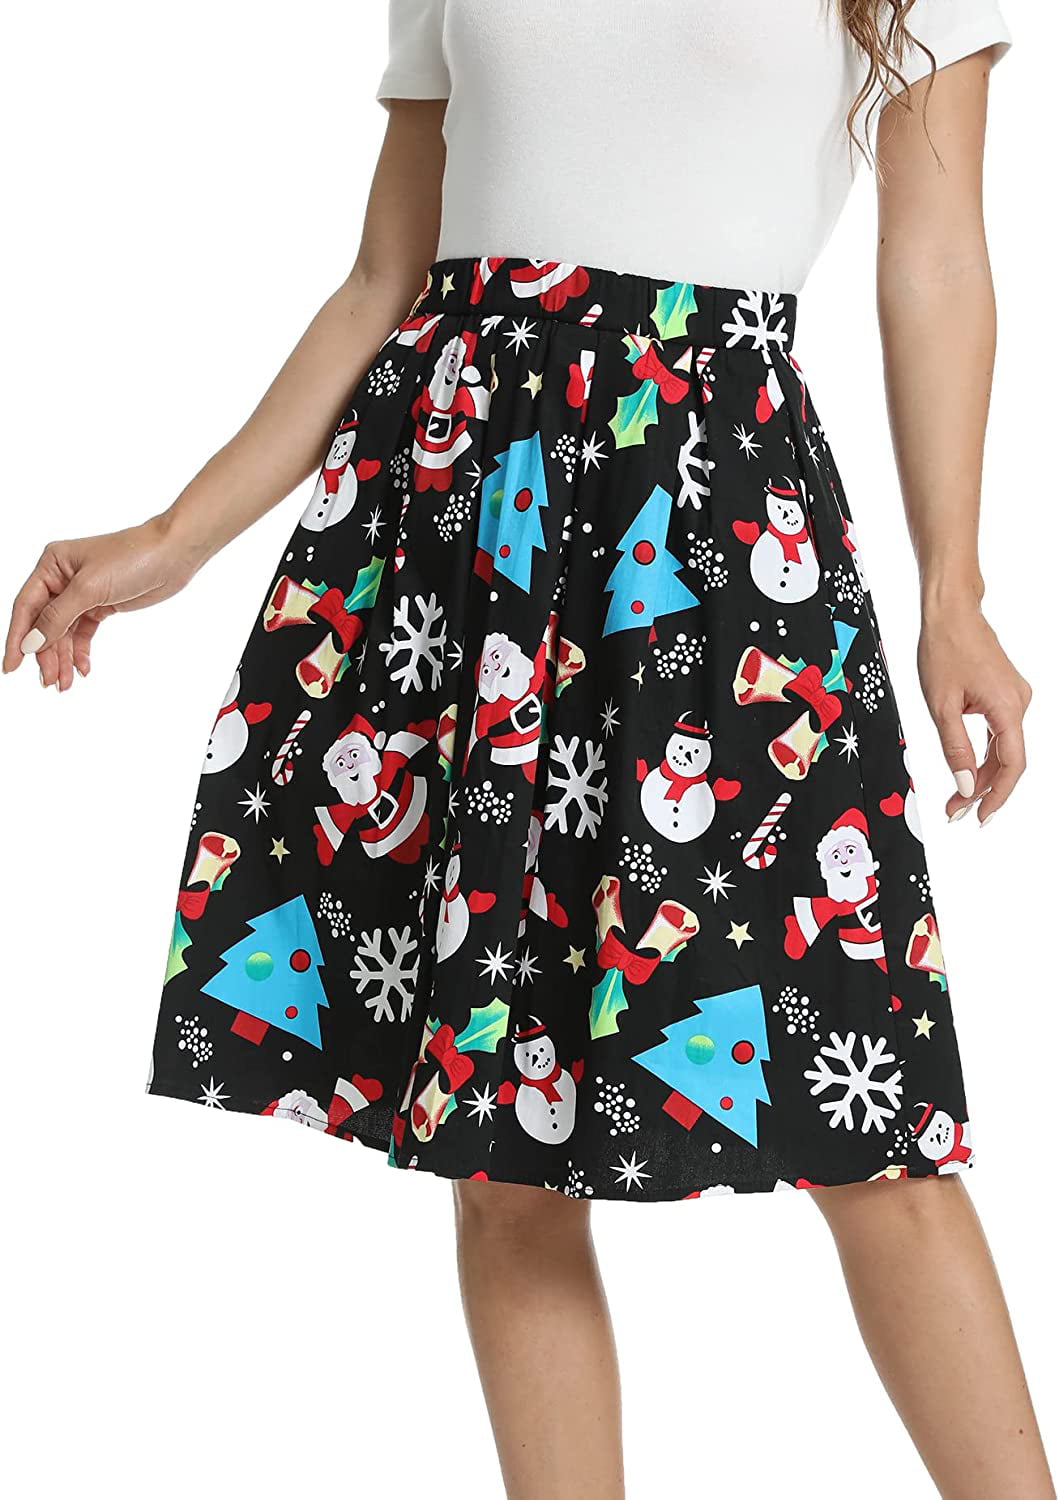 Women's Vintage A-line Printed Pleated Flared Midi Skirt with Pockets -  Walmart.com